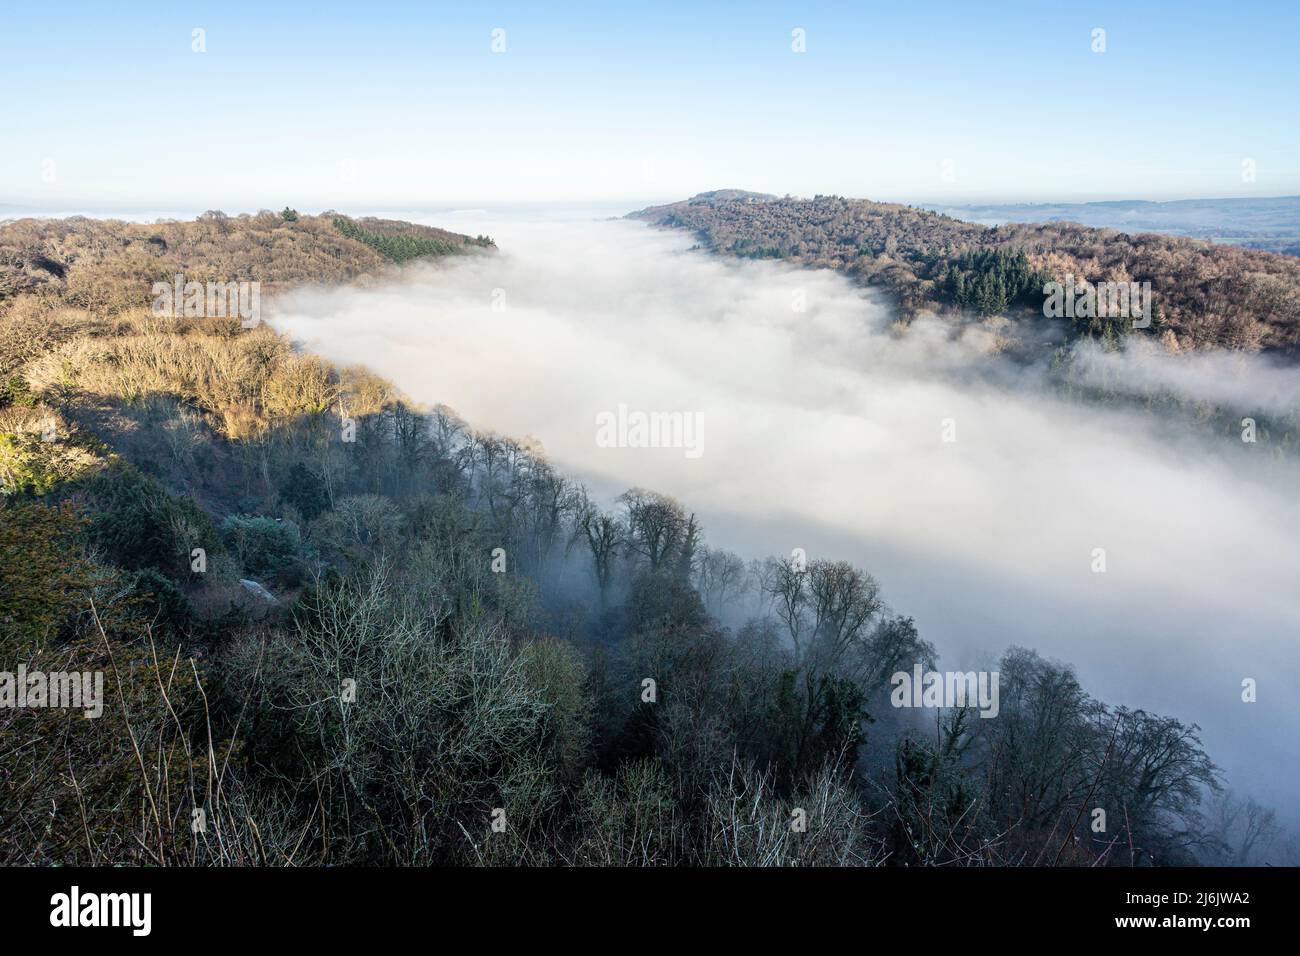 The River Wye totally obscured by mist due to a temperature inversion, seen from the viewpoint of Symonds Yat Rock, Herefordshire, England UK Stock Photo